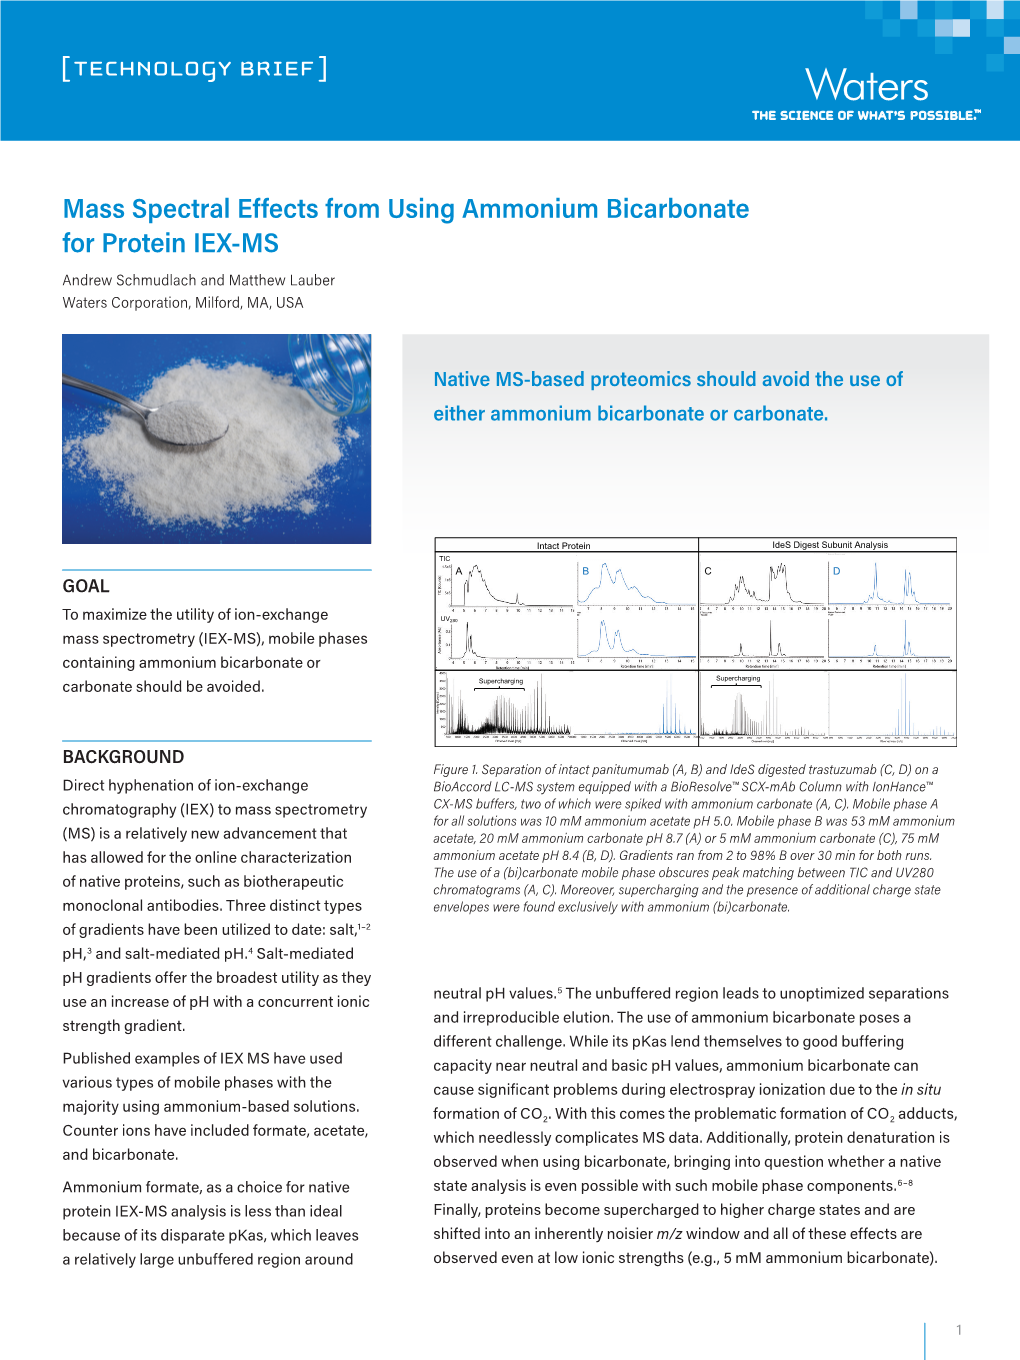 Mass Spectral Effects from Using Ammonium Bicarbonate for Protein IEX-MS Andrew Schmudlach and Matthew Lauber Waters Corporation, Milford, MA, USA